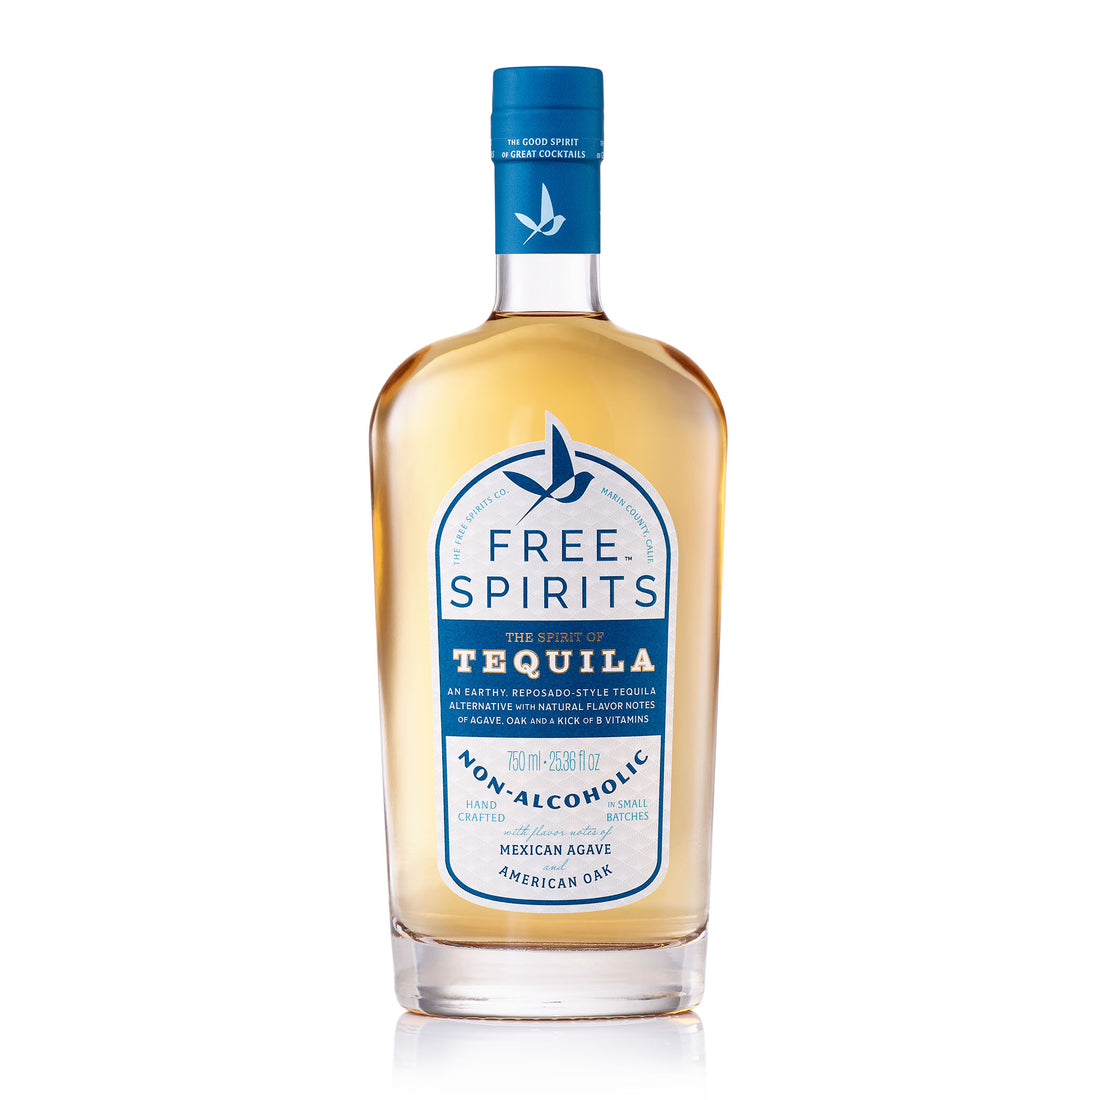 The Free Spirits Company - The Spirit of Tequila